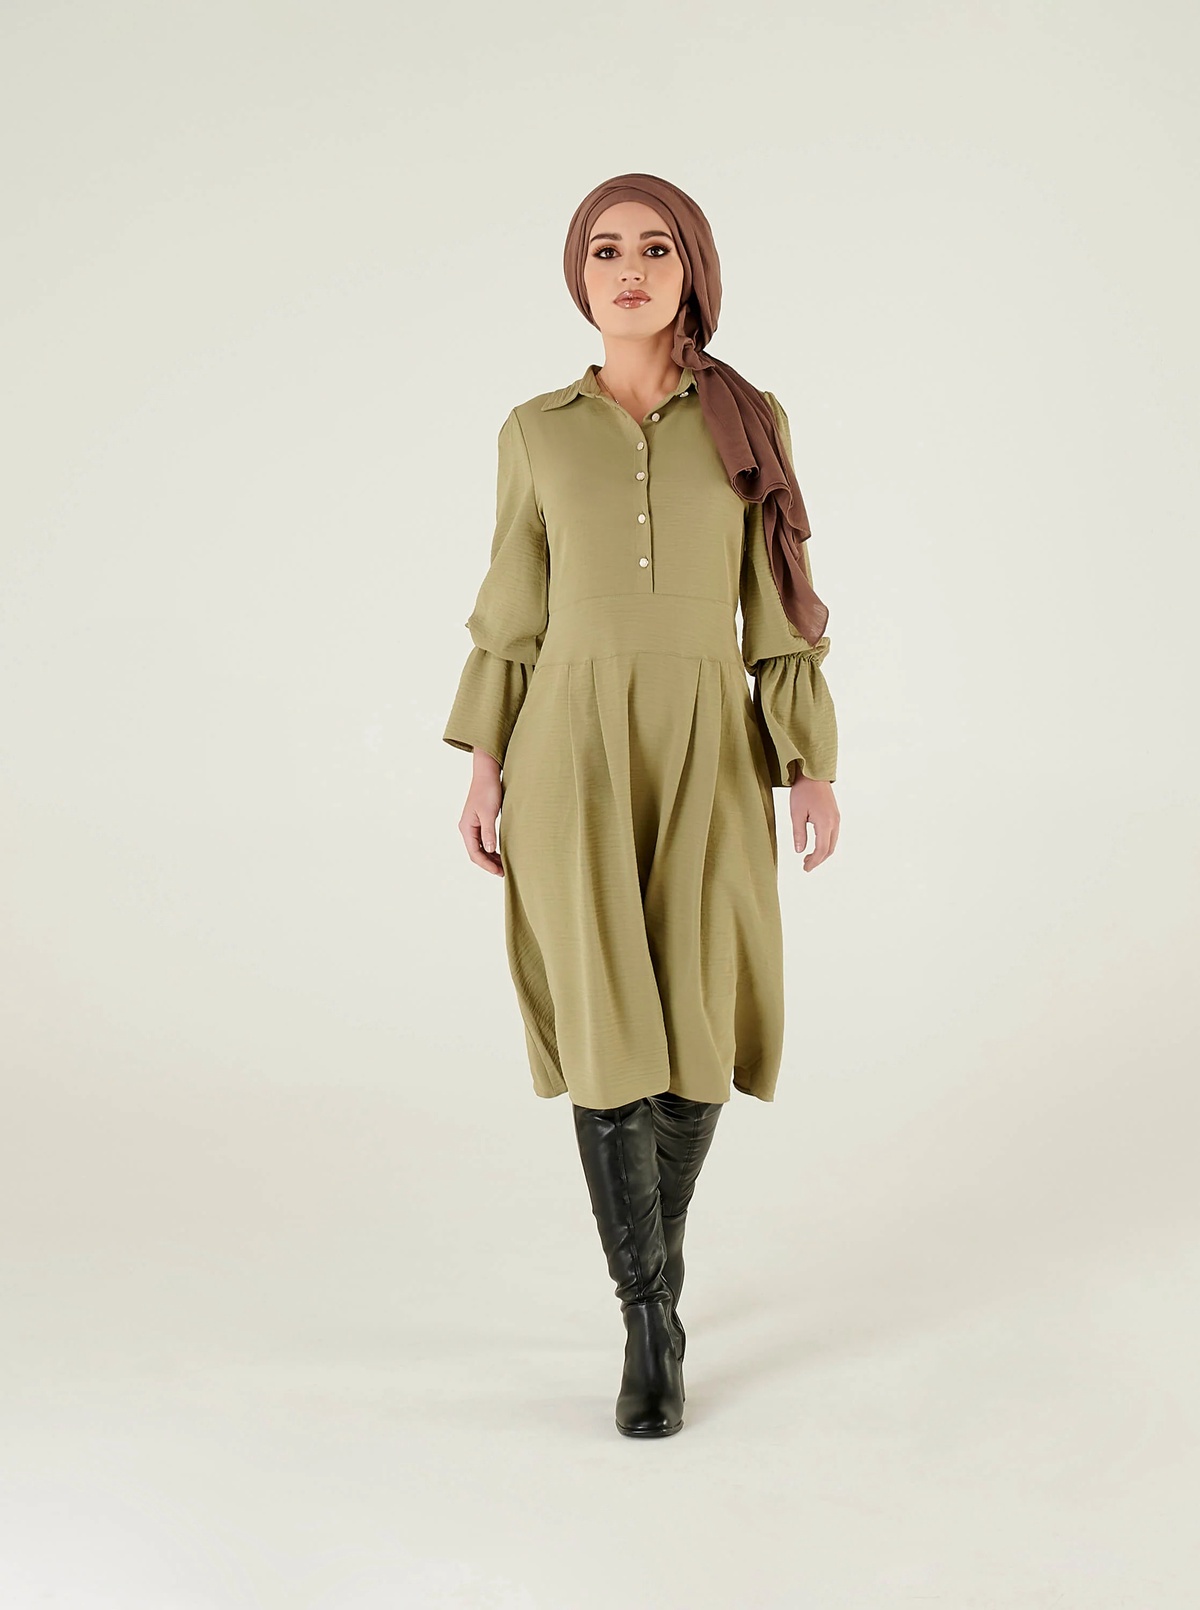 How to Look Stylish in Modest Shirt Dresses During Winter